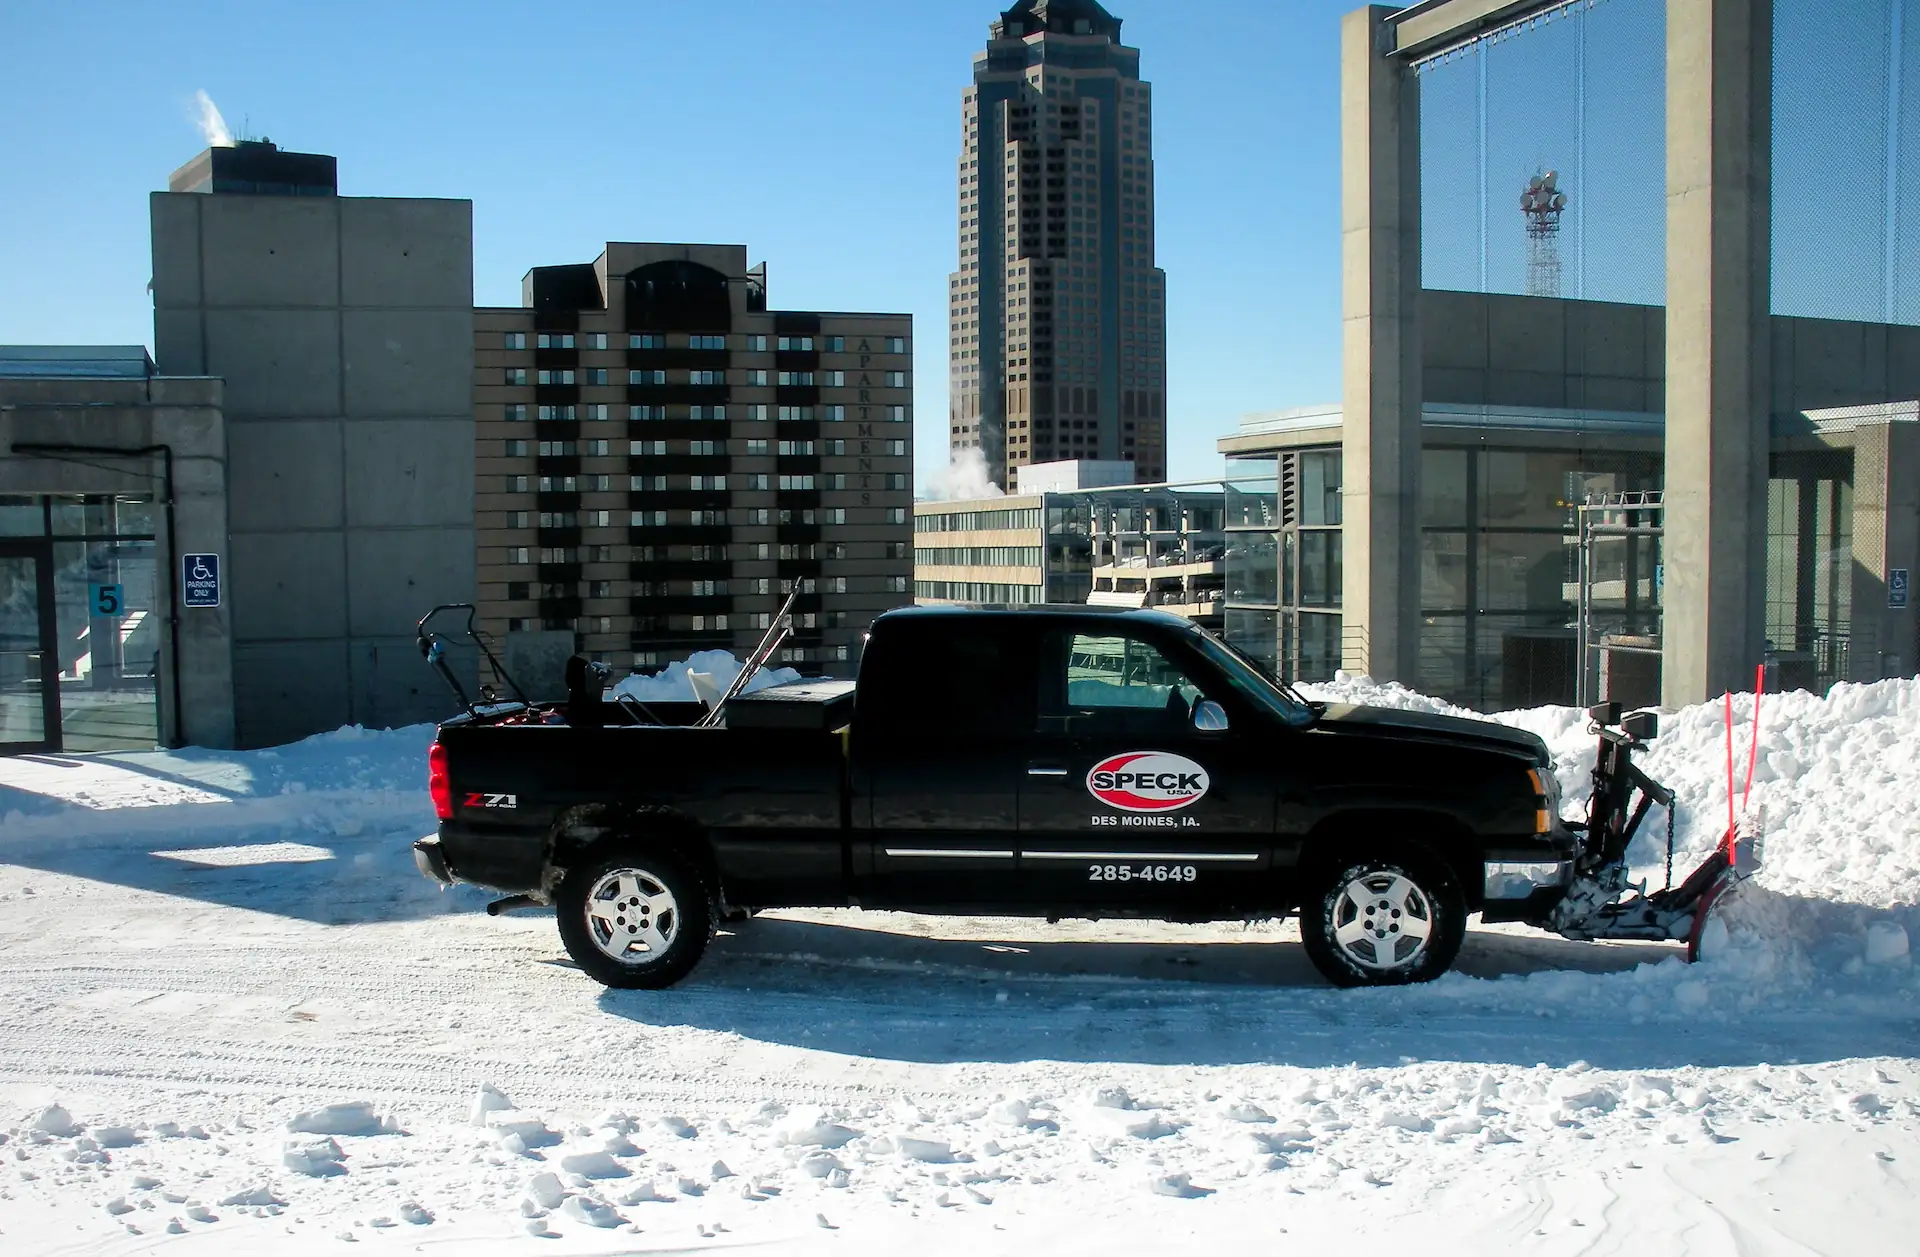 A black pick up truck with the Speck USA logo on the side and a snow plow attached to the front sits in a snow-covered parking lot in the daylight. Hiring snow removal services is an important part of maintaining business in winter.